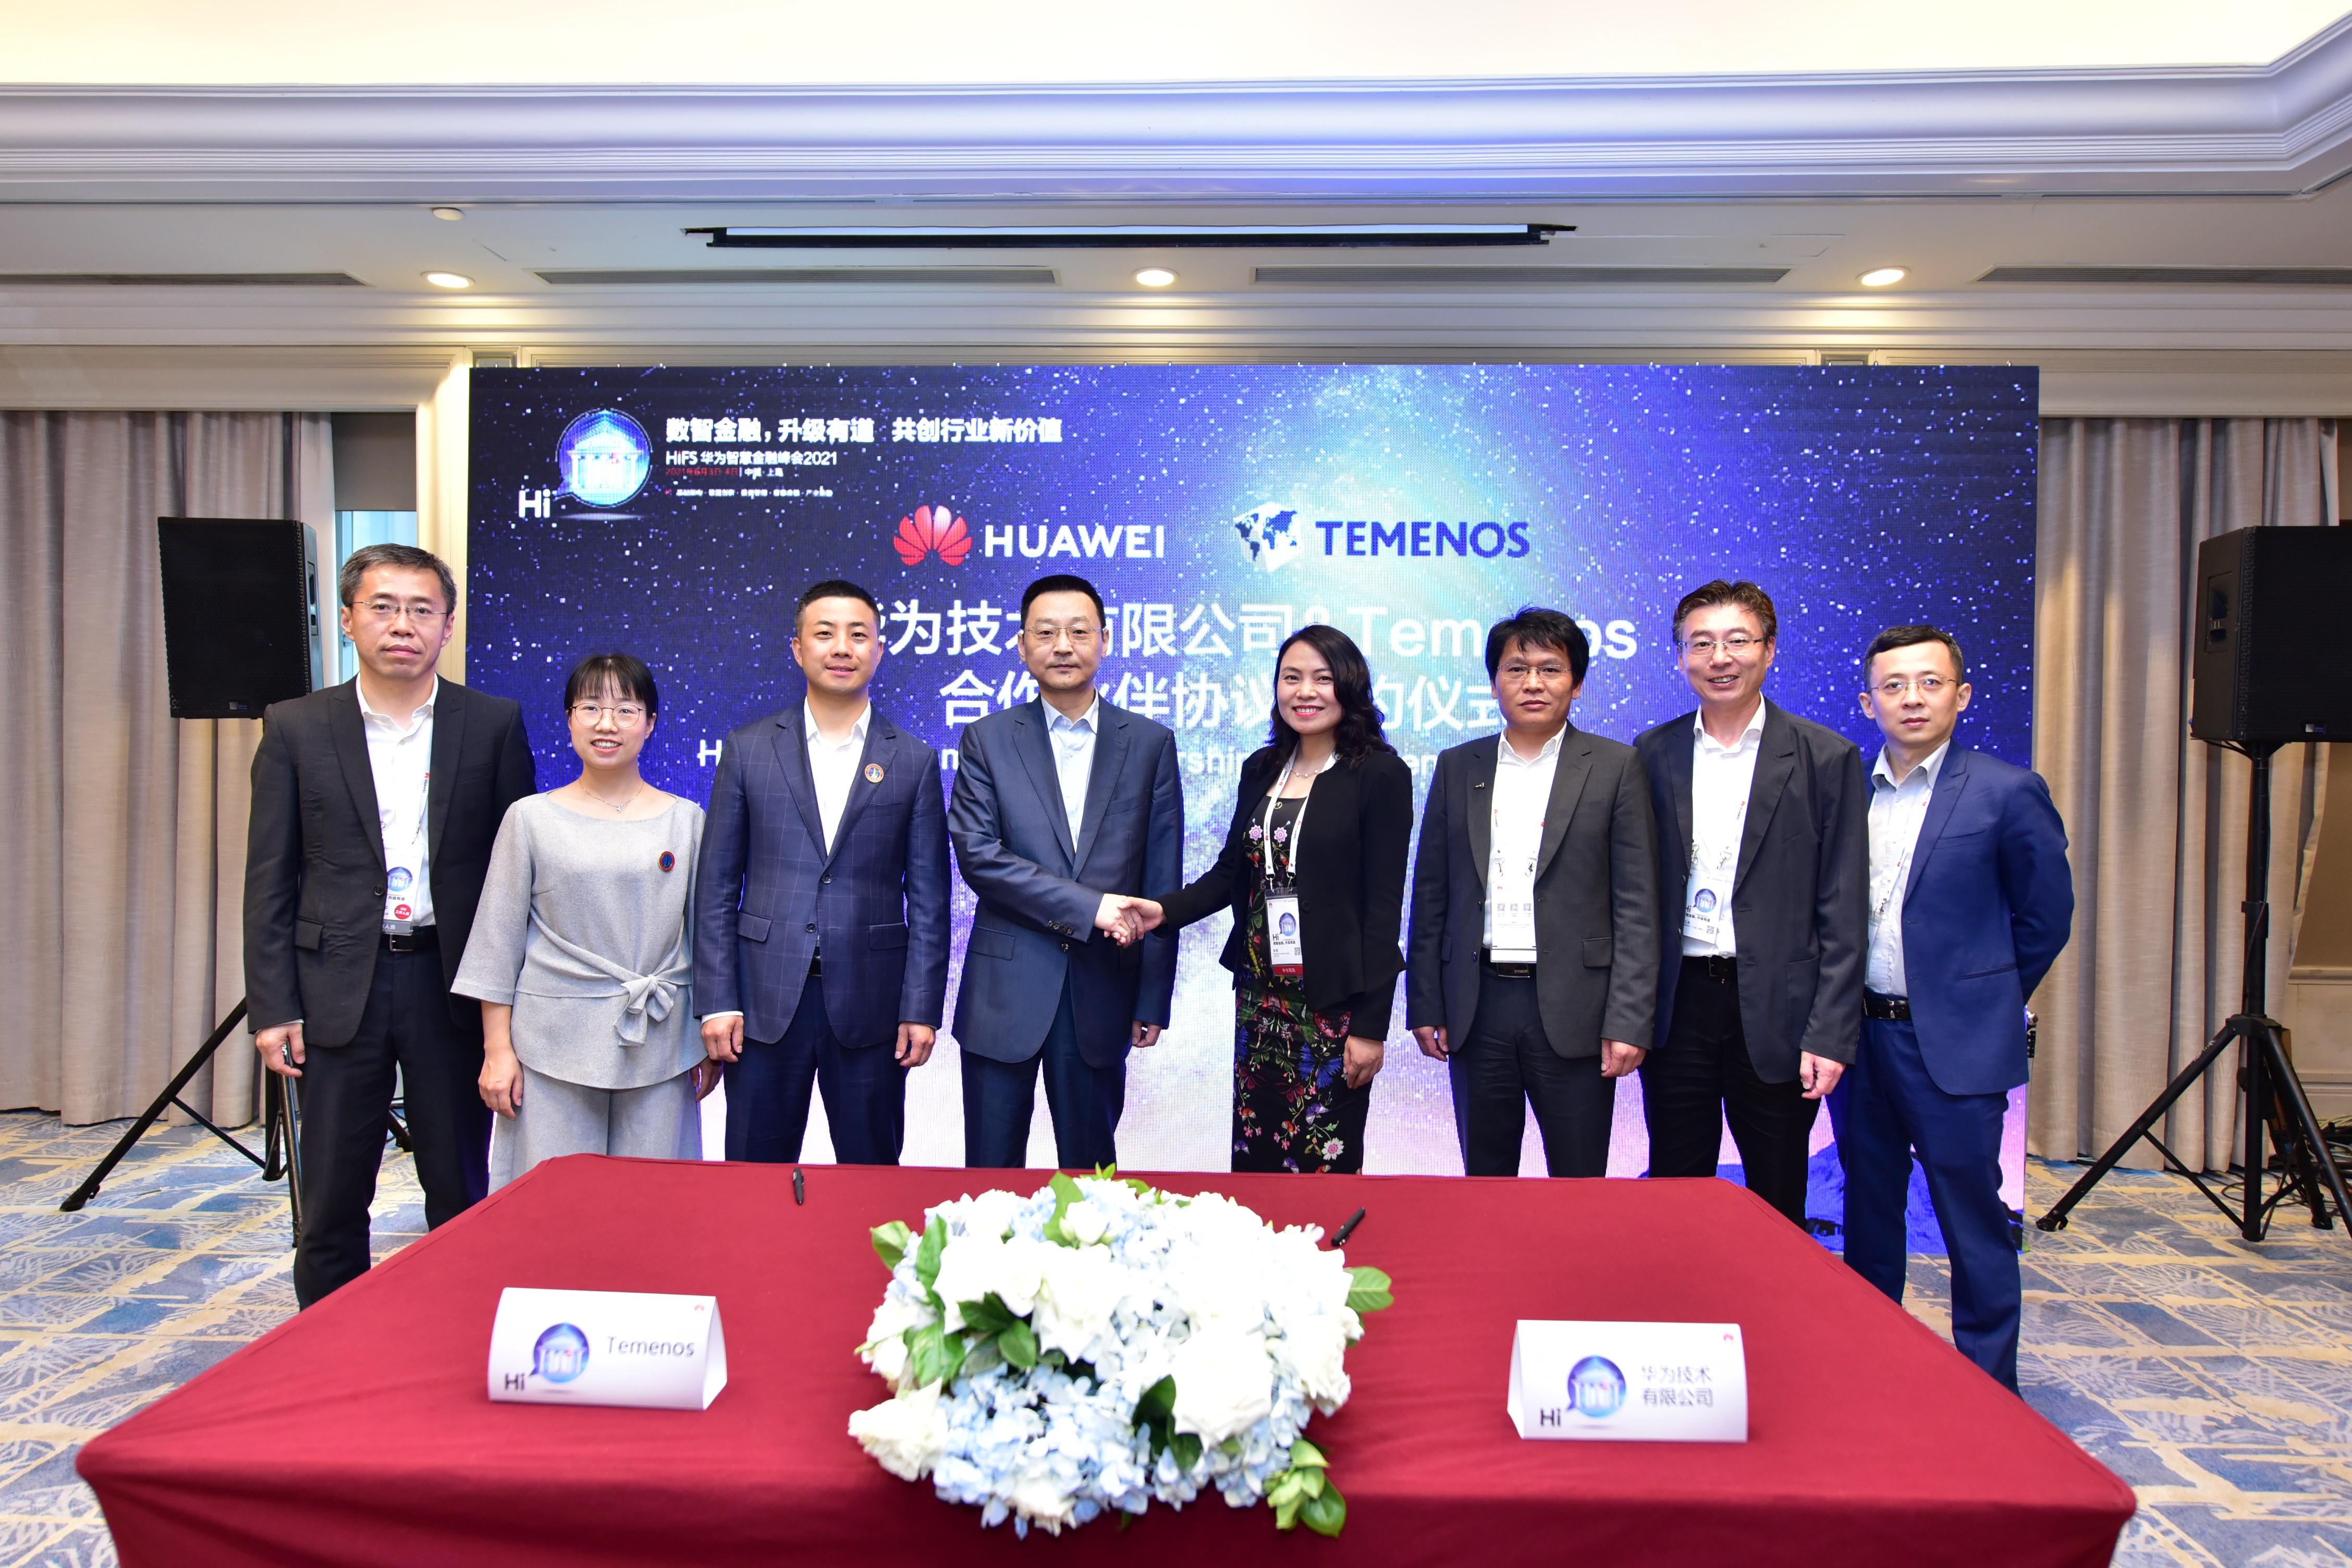 Executives from Huawei and Temenos shake hands to symbolize their technology partnership agreement